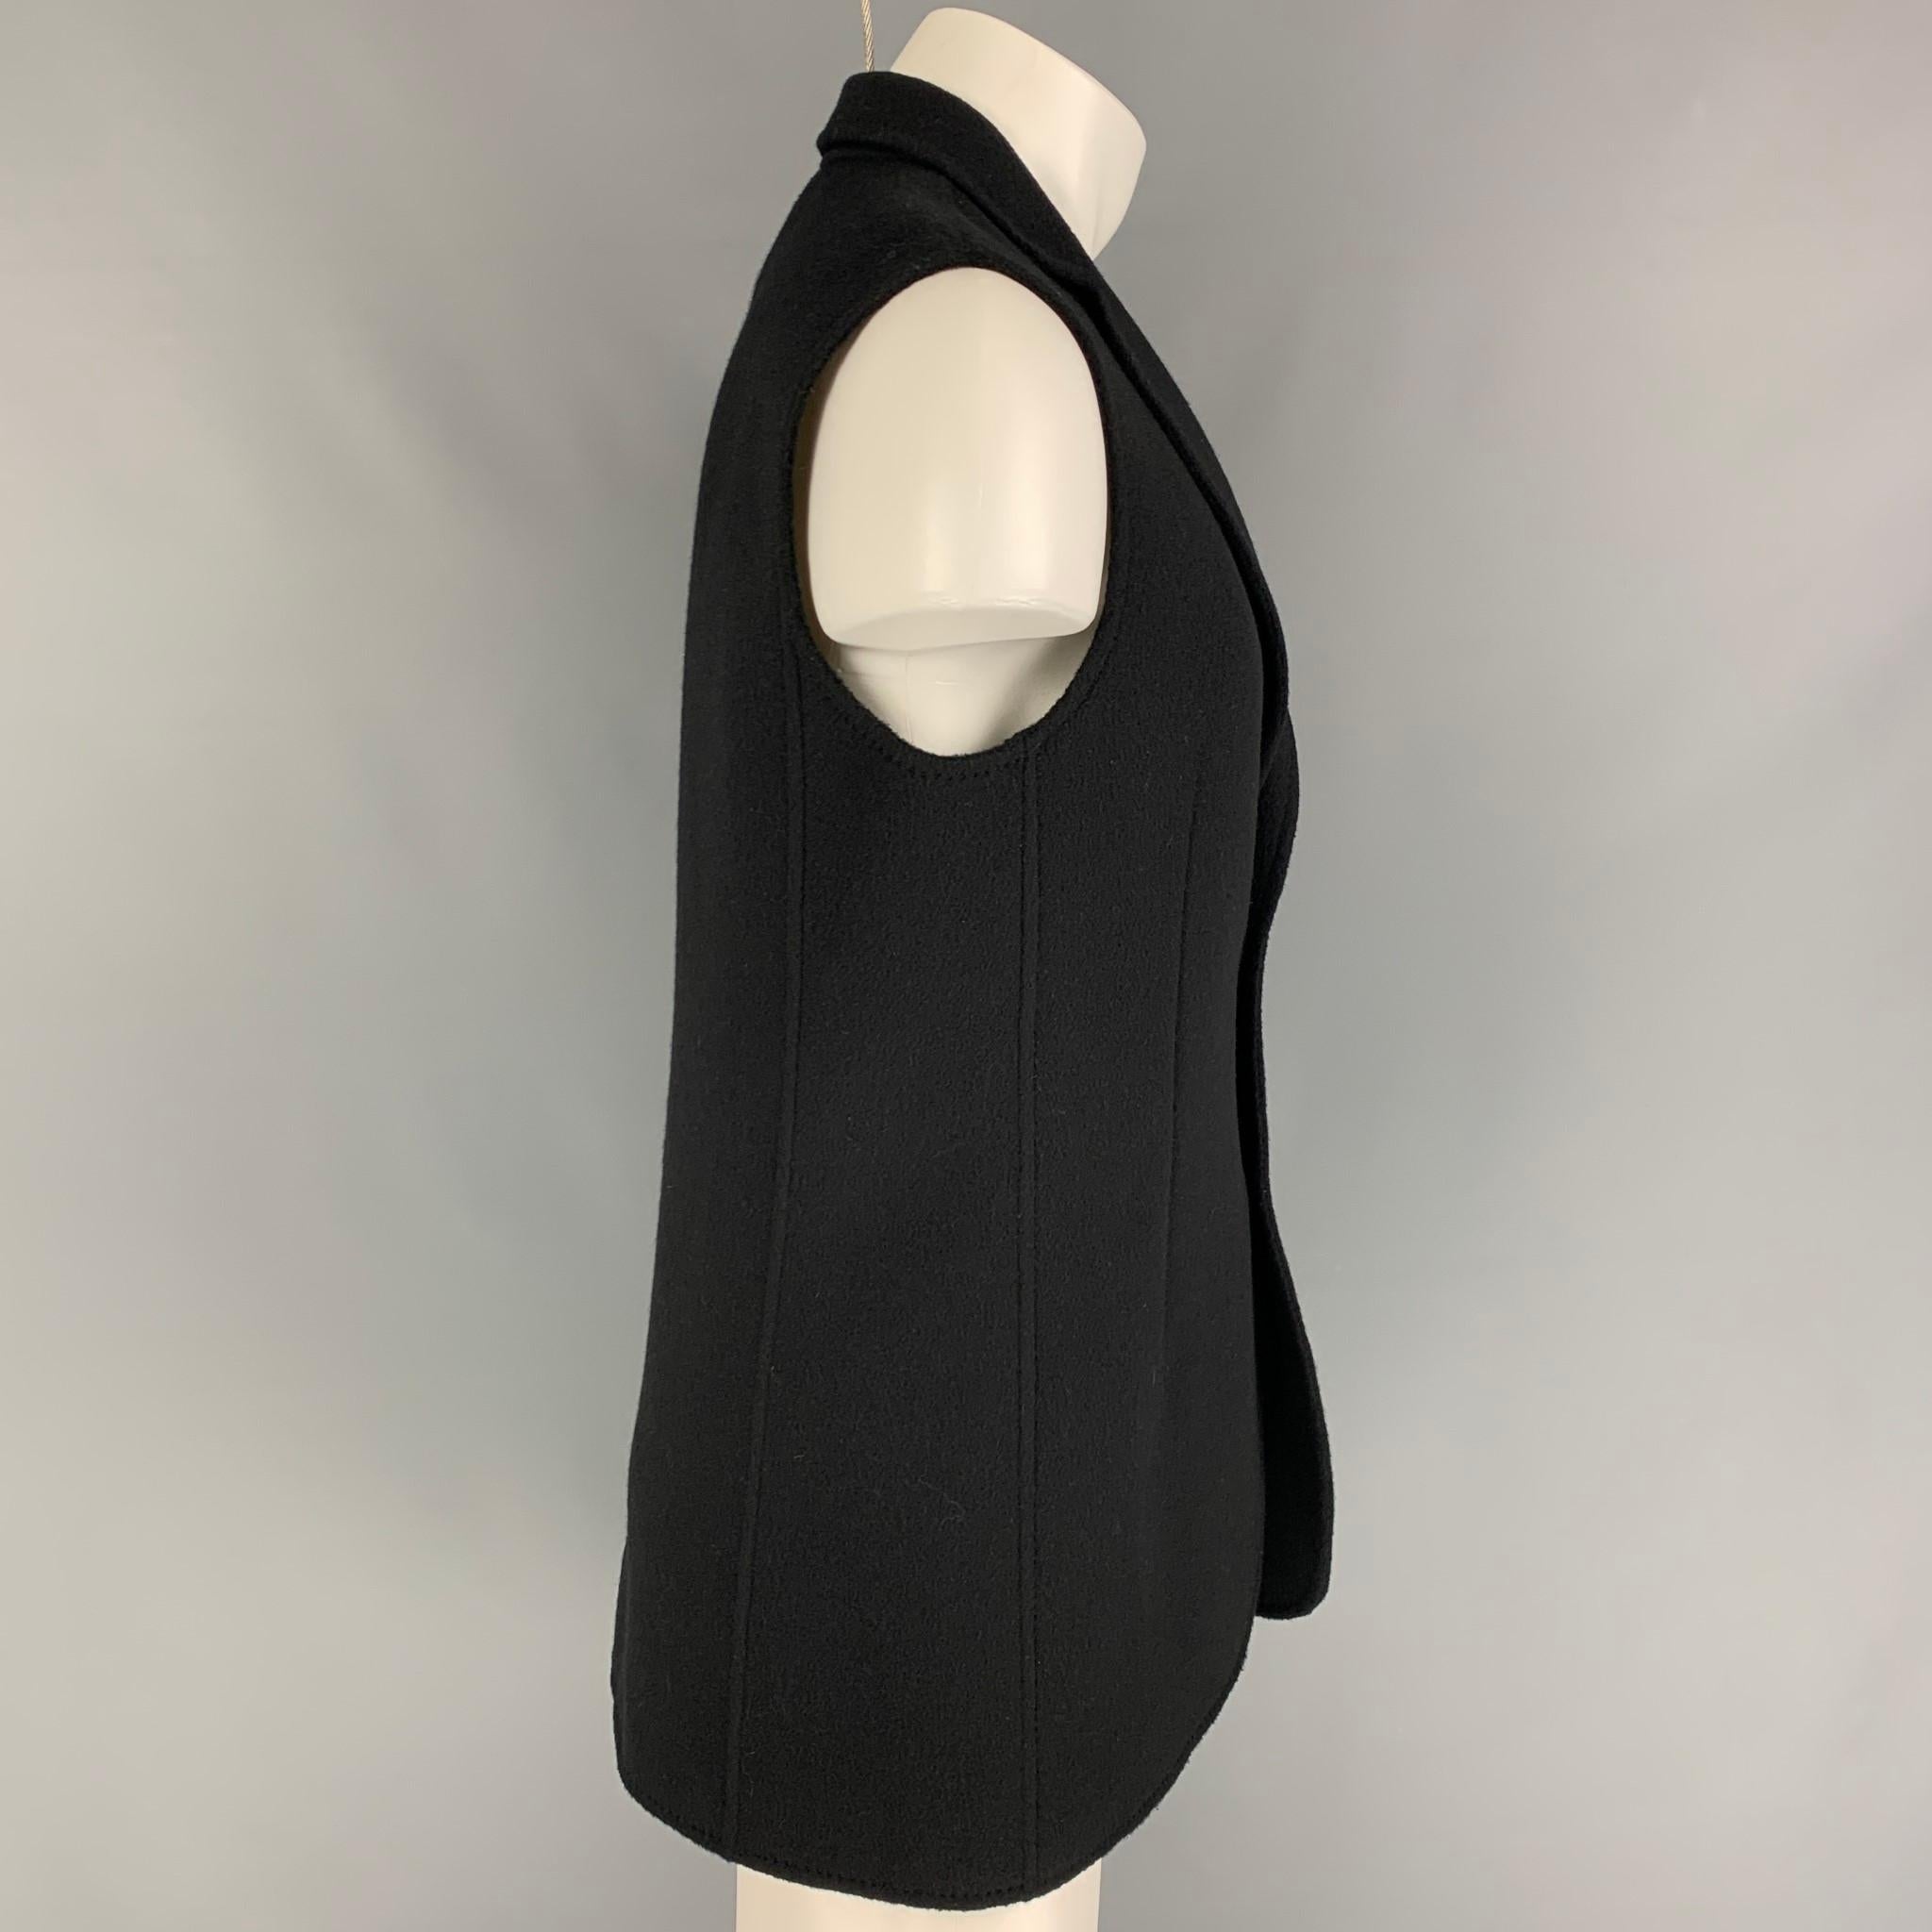 RAF SIMONS vest comes in a virgin wool featuring a notch lapel, patch pocket, and a double button closure. Made in Italy. 

Excellent Pre-Owned Condition.
Marked: 50

Measurements:

Shoulder: 17 in.
Chest: 40 in.
Length: 29.5 in. 